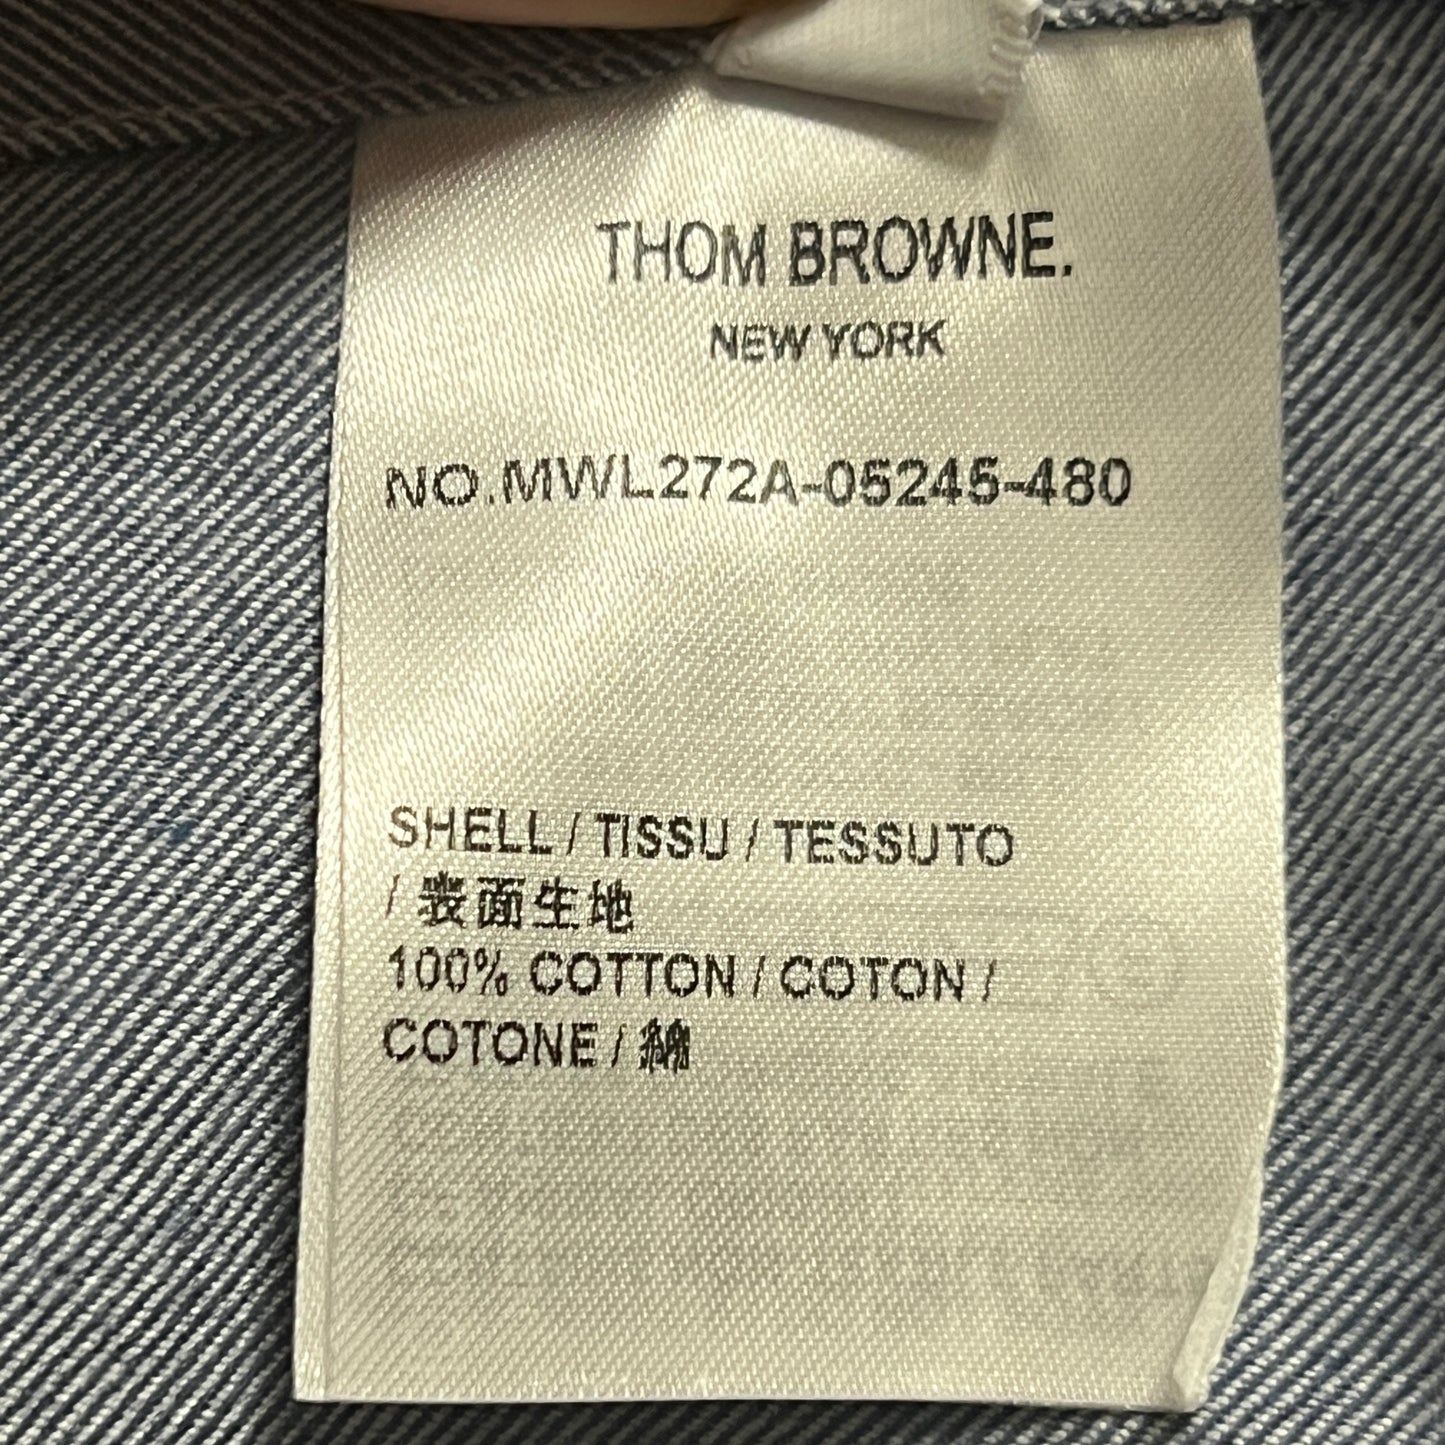 THOM BROWNE Straight Fit BD LS Shirt w/CB RWB GG in Solid Flannel w/woven 4 Bar Stripe in Light Blue Size 4 (NEW)